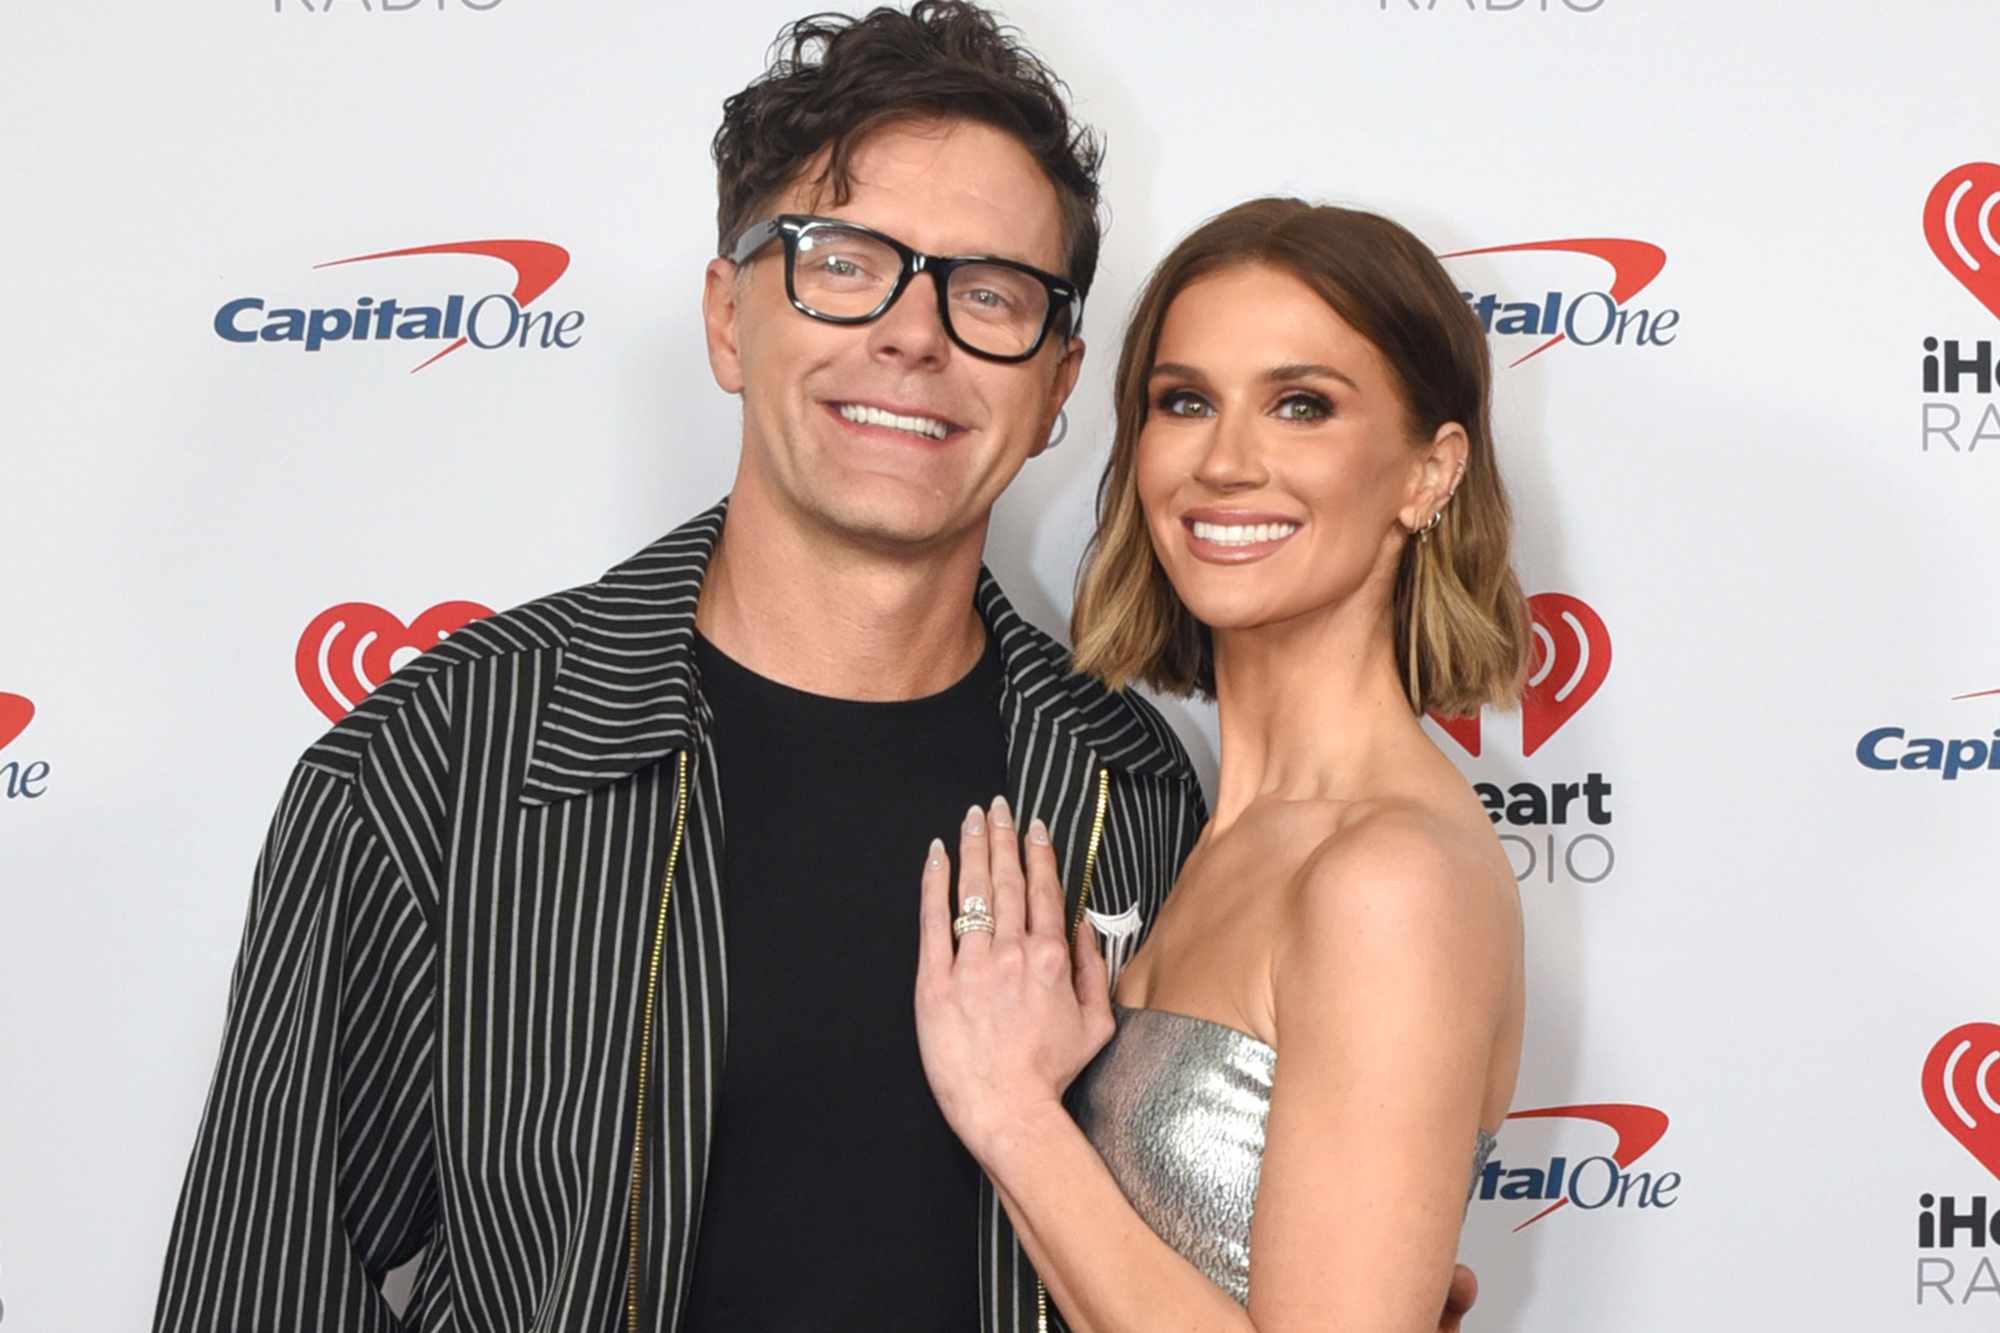 Who Is Bobby Bones’ Wife? All About Caitlin Parker